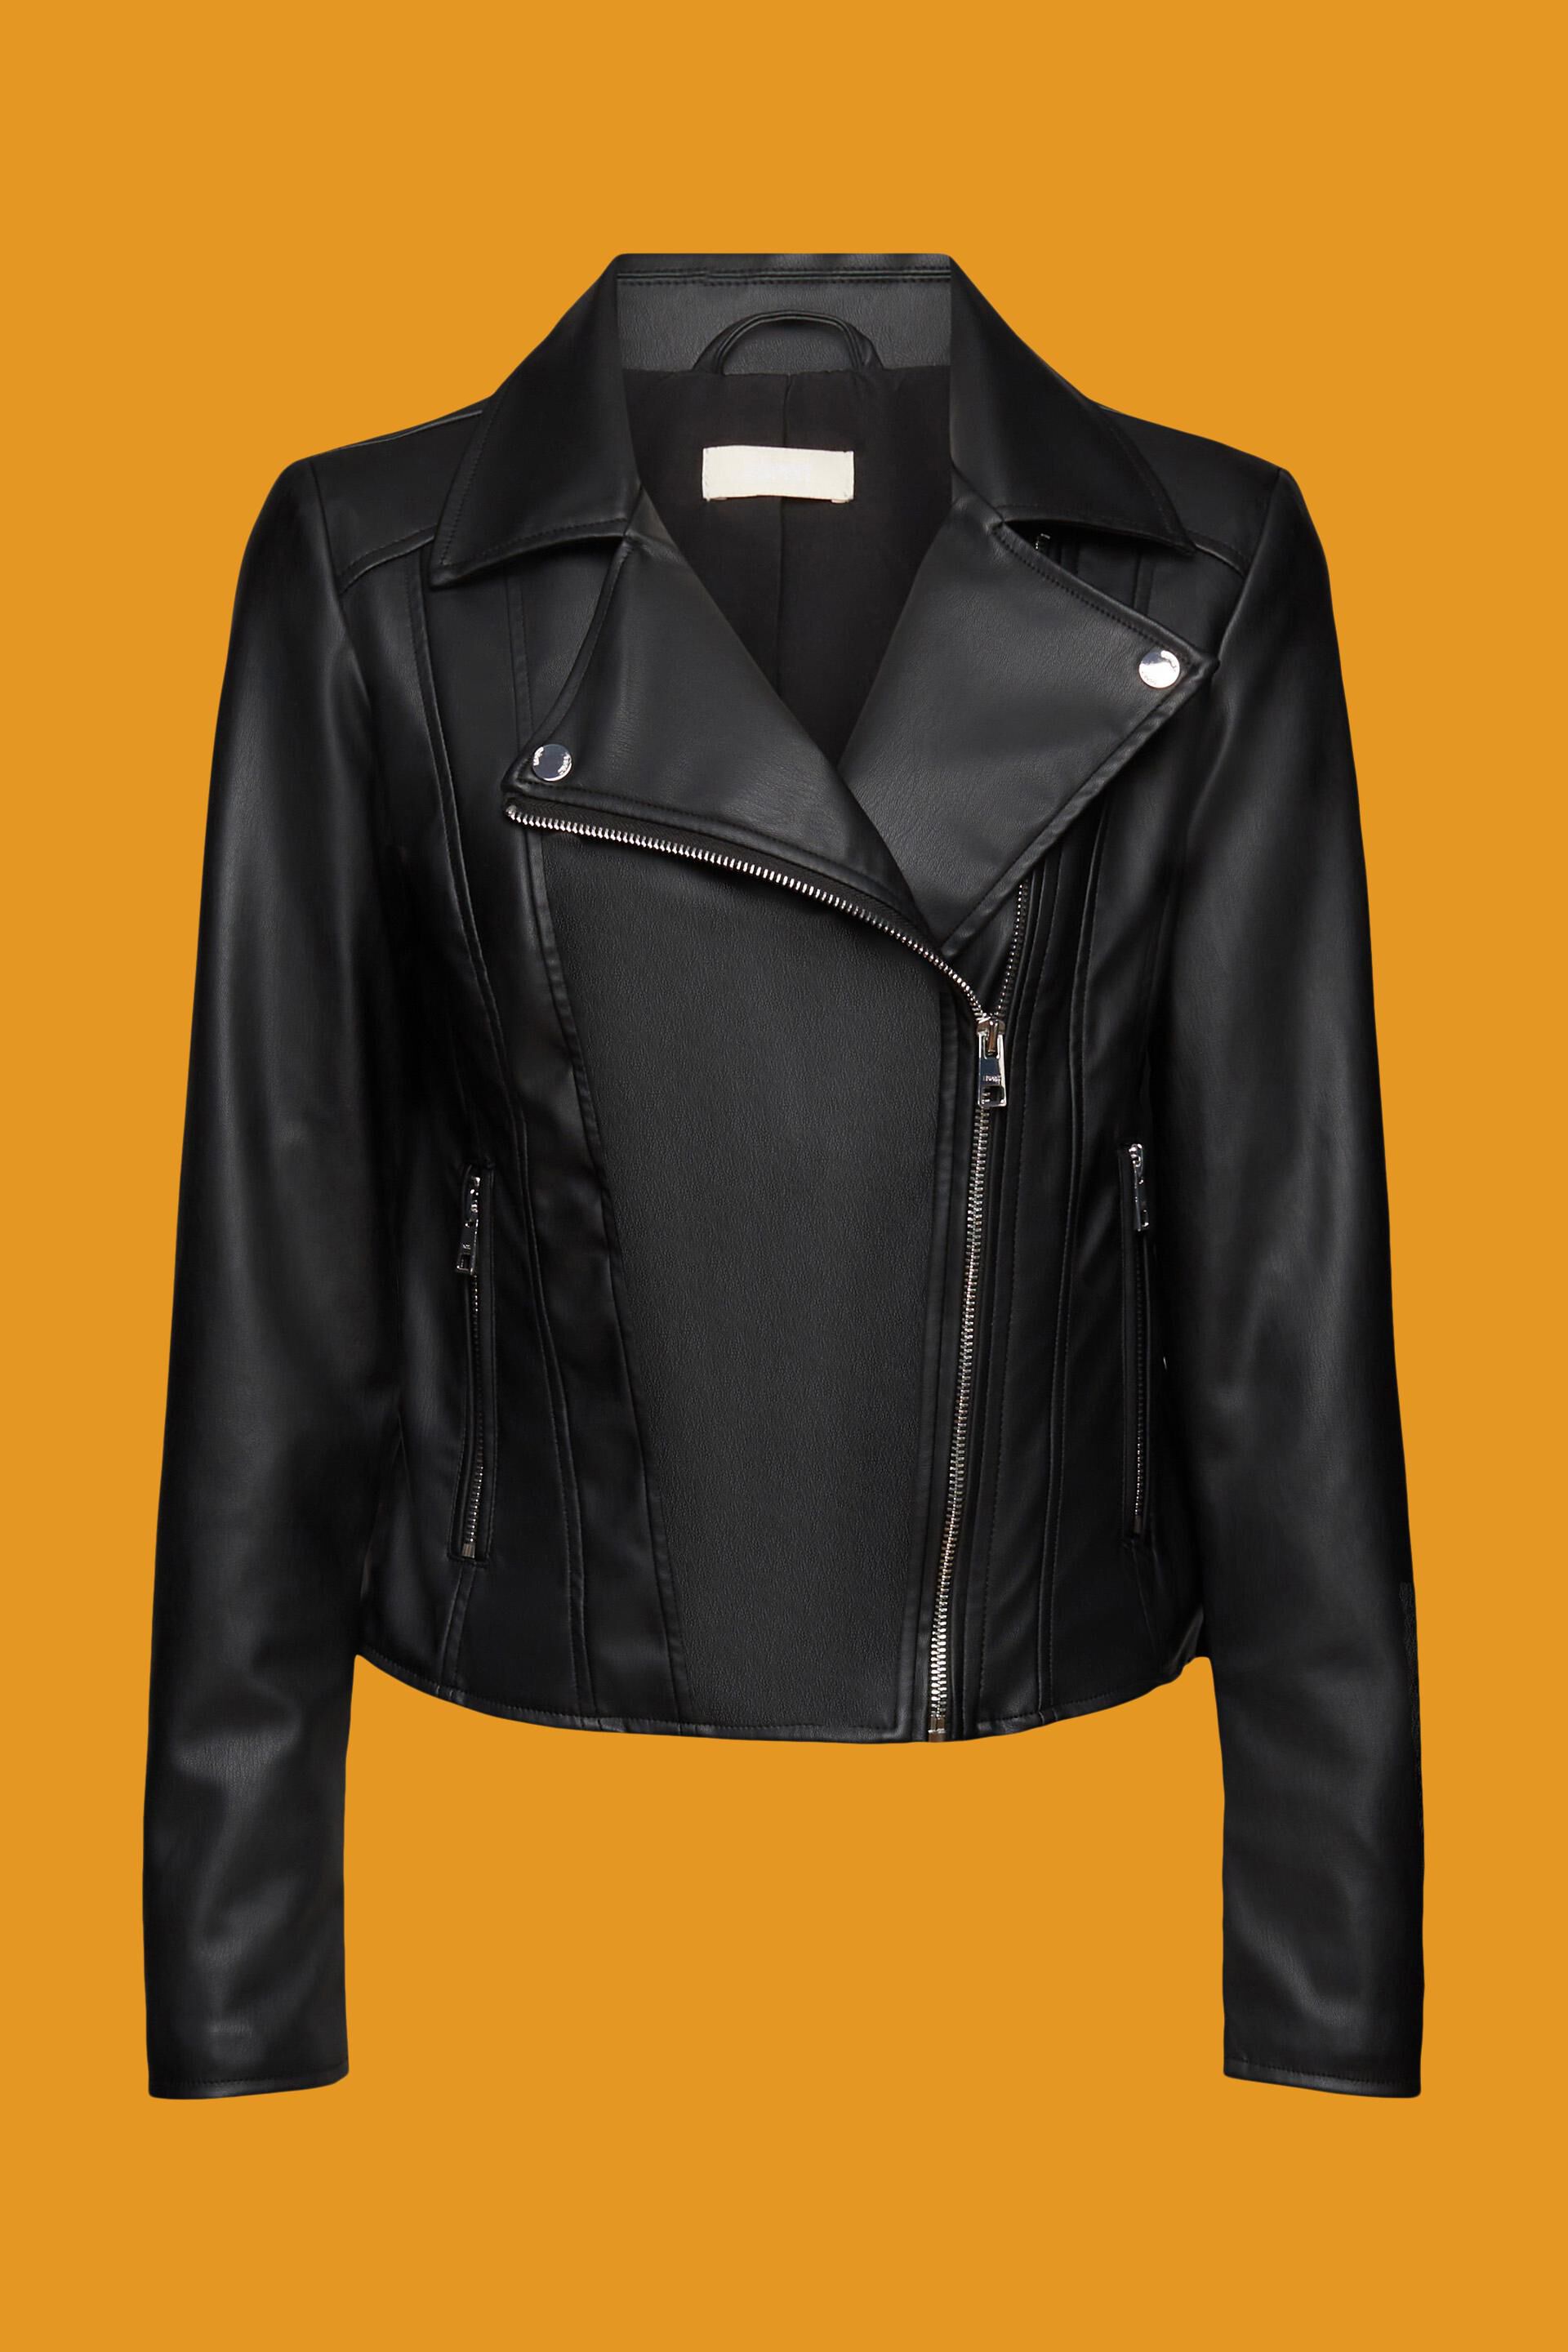 Winter Leather Jackets for women under 2000: Winter Leather jackets for  women under 2000: Upgrade your wardrobe with budget-friendly leather jackets  - The Economic Times